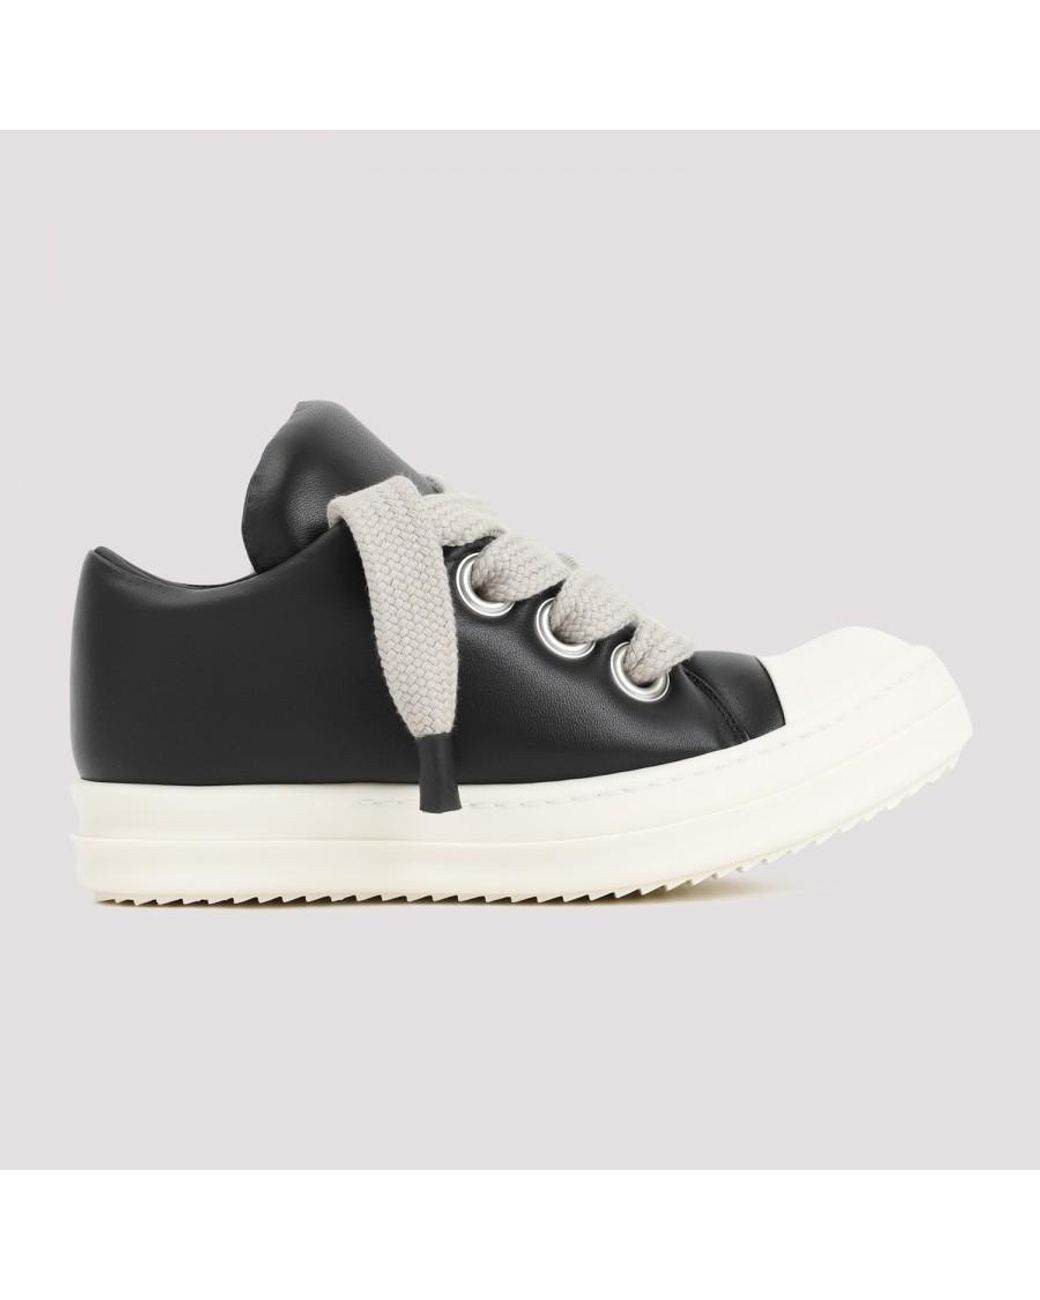 Rick Owens Jumbo Lace Padded Low Sneakers Shoes in Black | Lyst